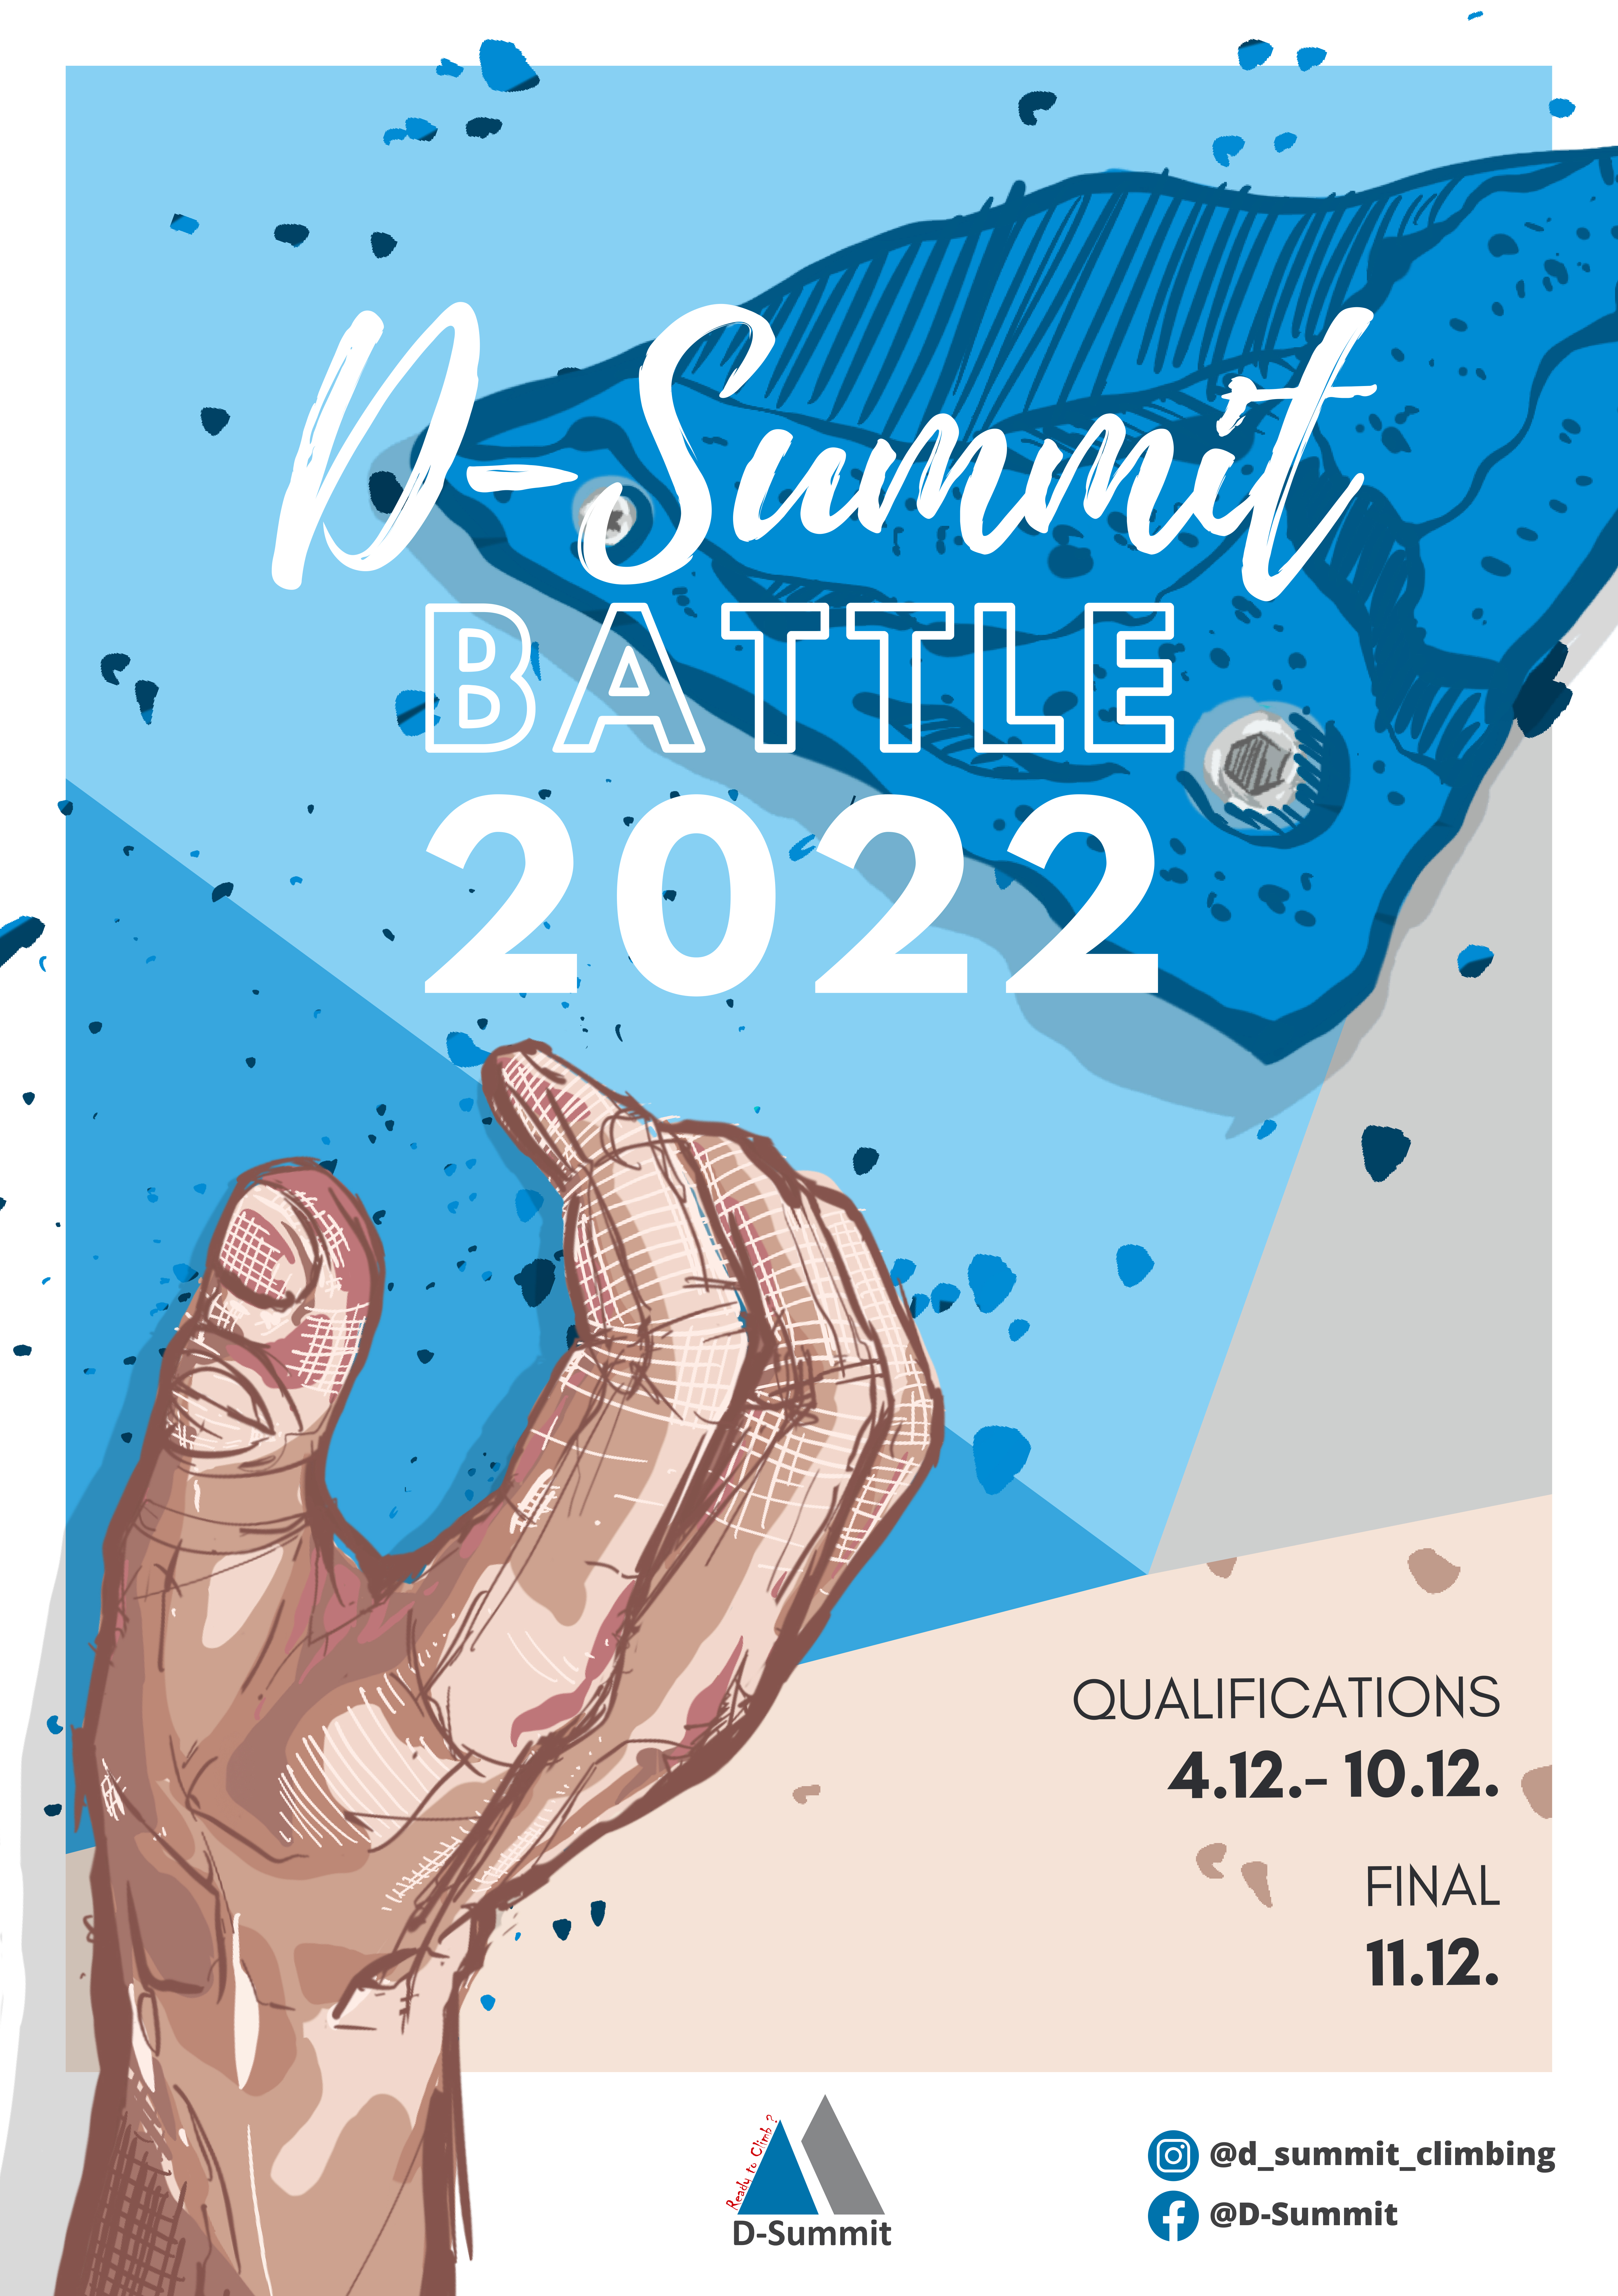 Poster for D-Summit Battle